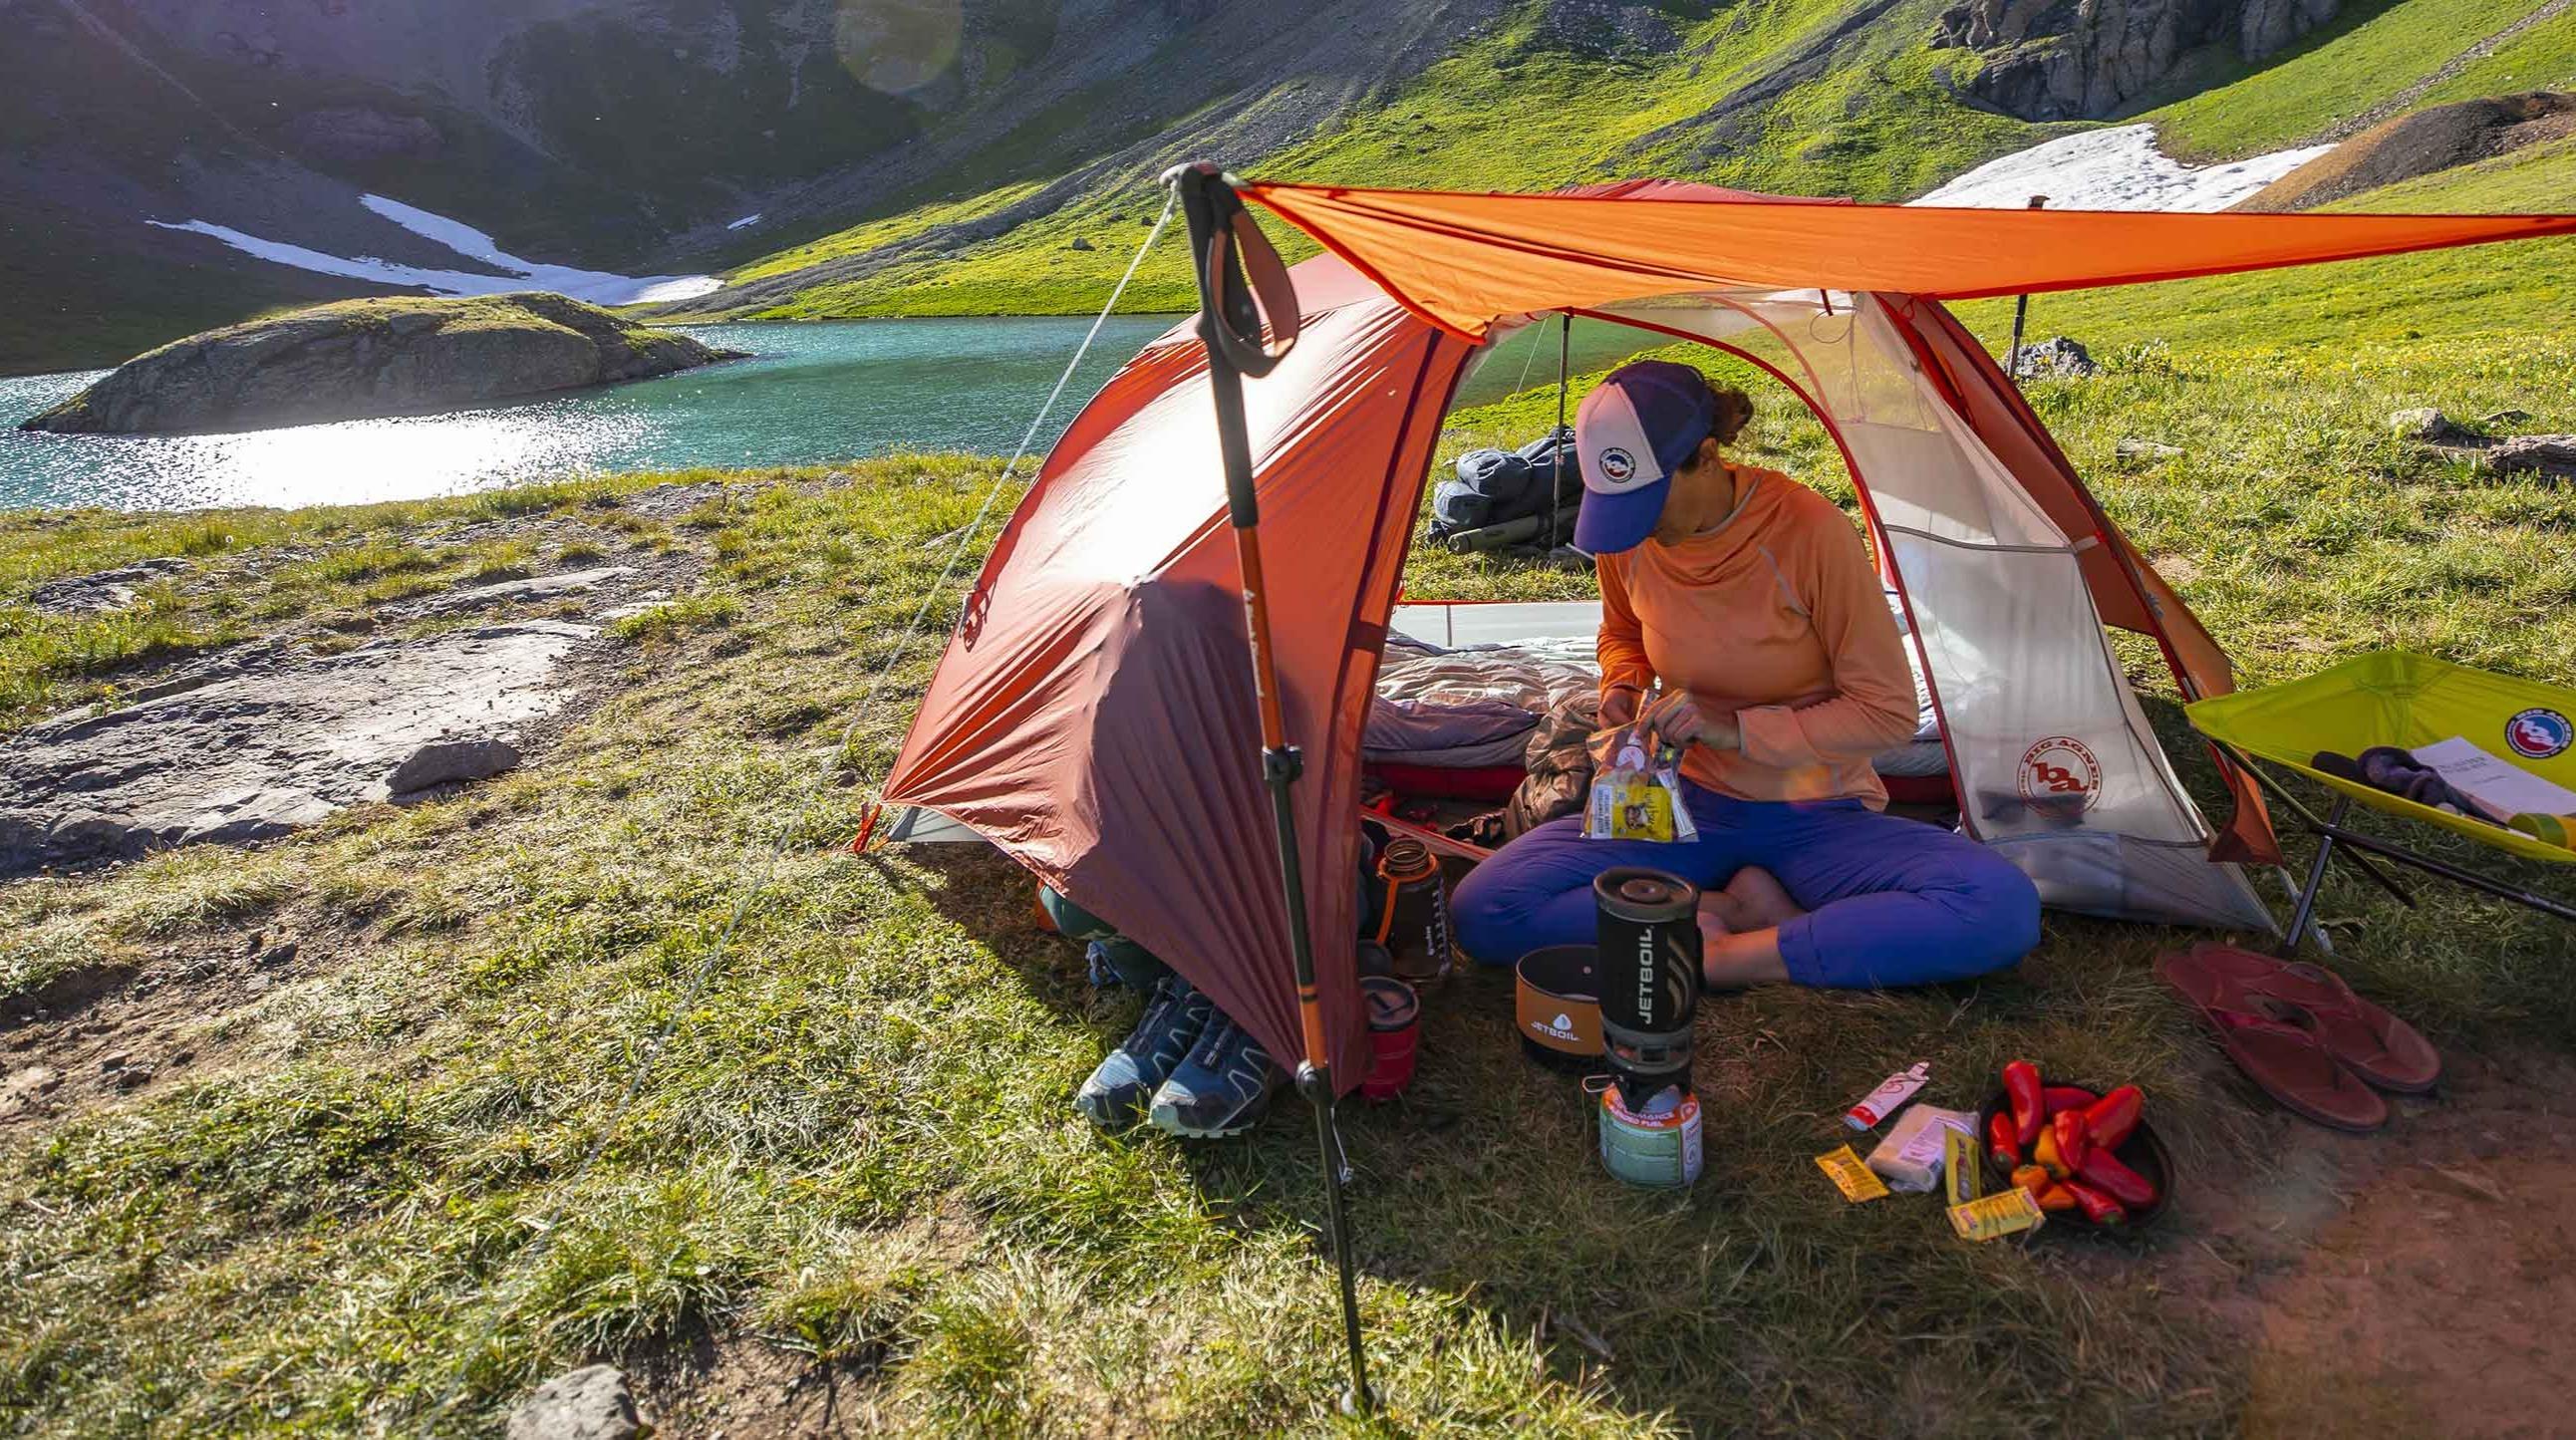 WildBounds manufactures sustainable camping gear and exceptional accessories